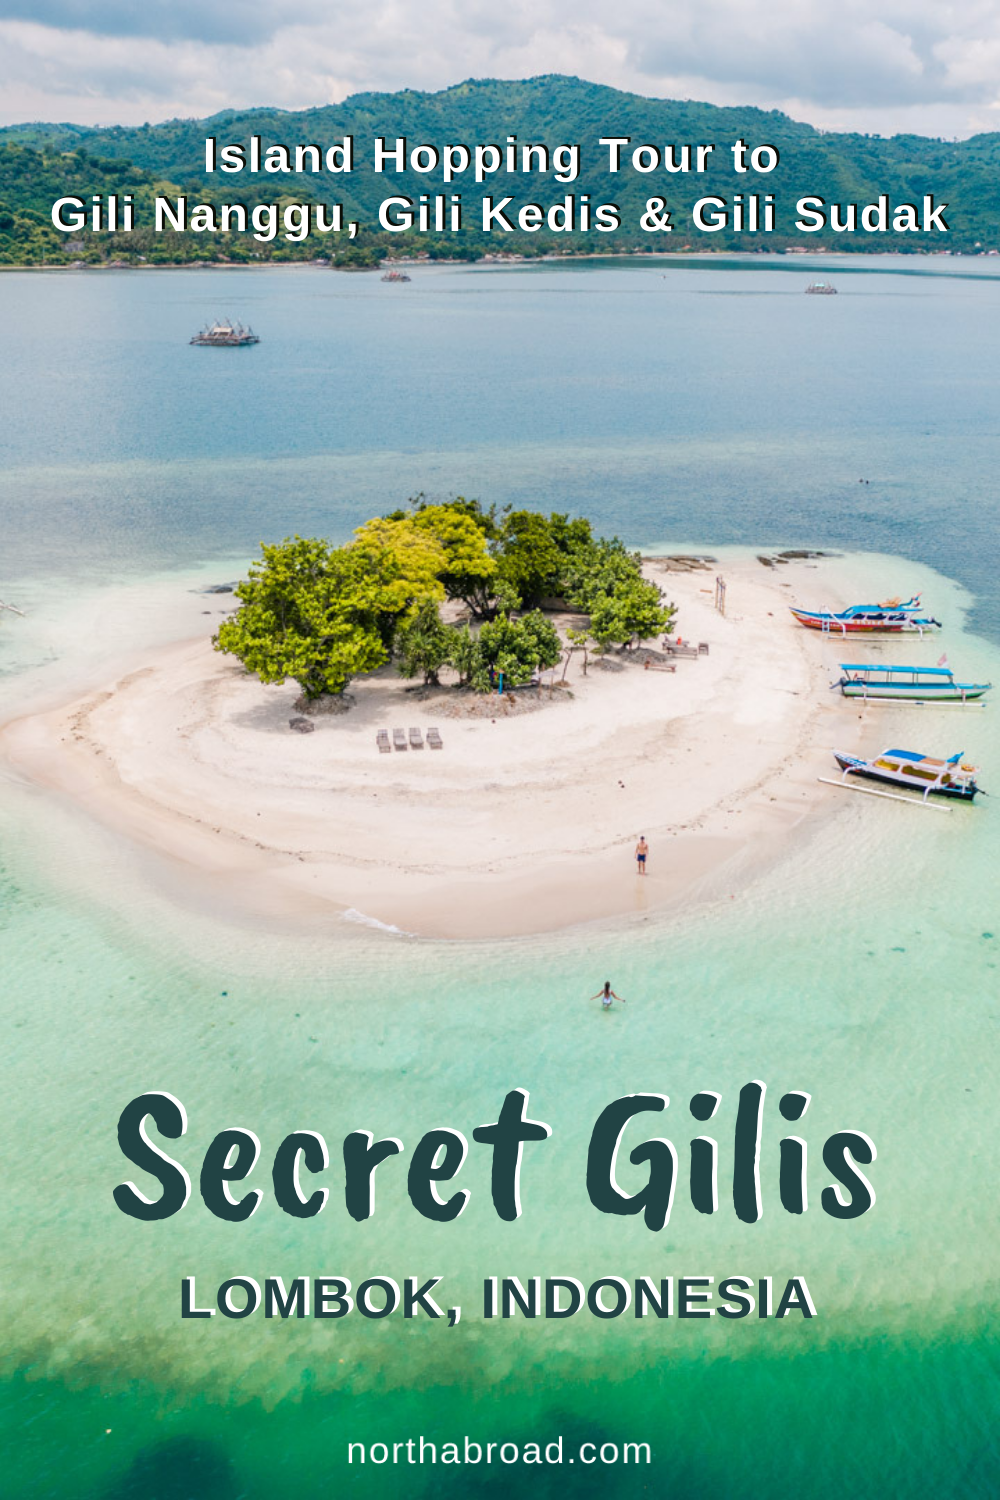 Travel Guide: Island Hopping Tour to the Secret Gilis from Lombok